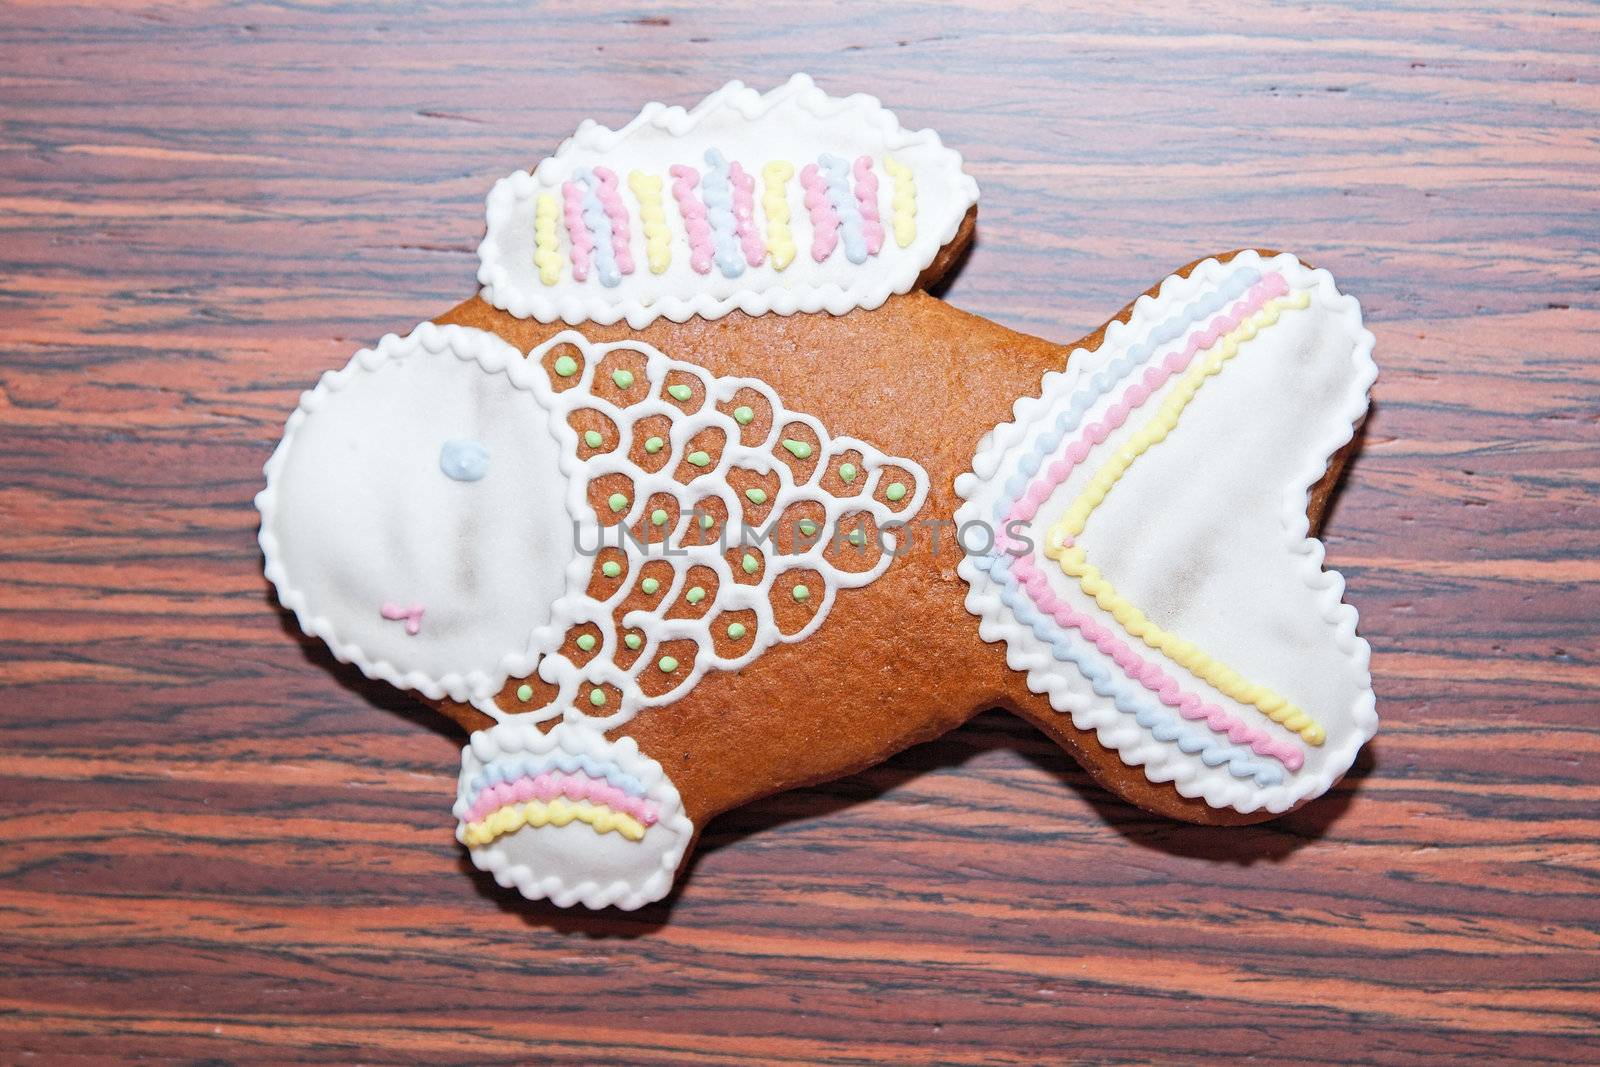 Gingerbread in the form of a fish on a wooden background